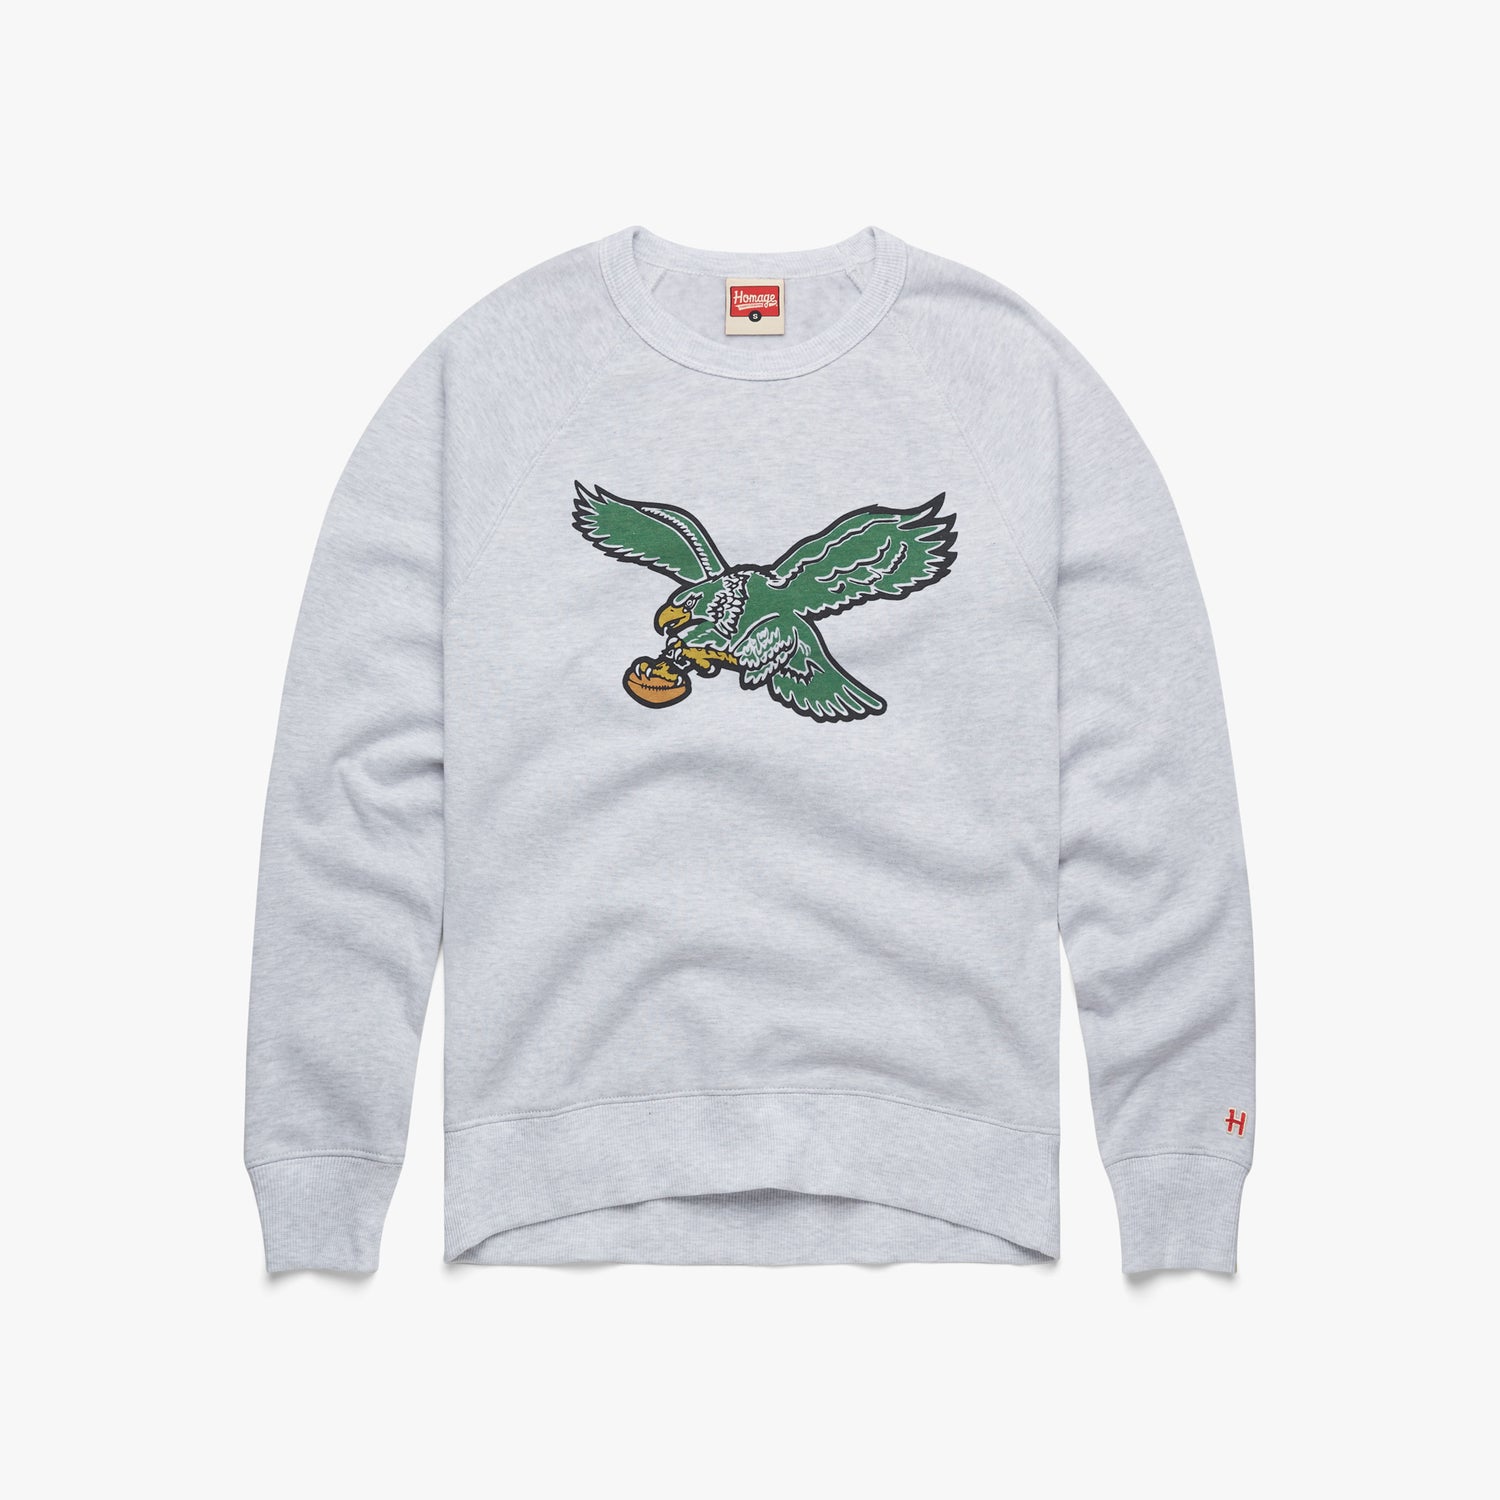 Philadelphia Eagles '87 Crewneck | Kelly Green Eagles Apparel from Homage. | Officially Licensed NFL Apparel from Homage Pro Shop.